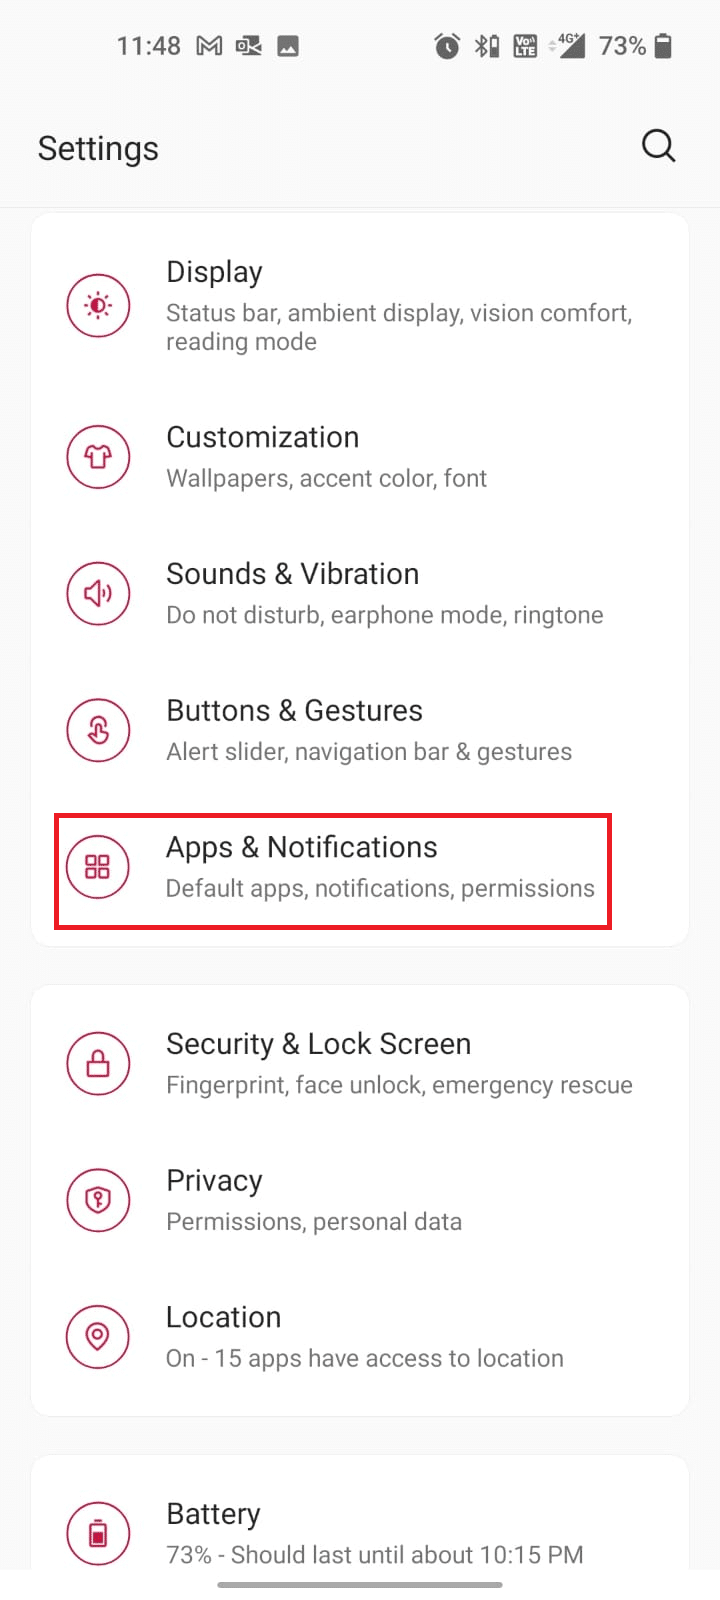 Apps and Notifications option